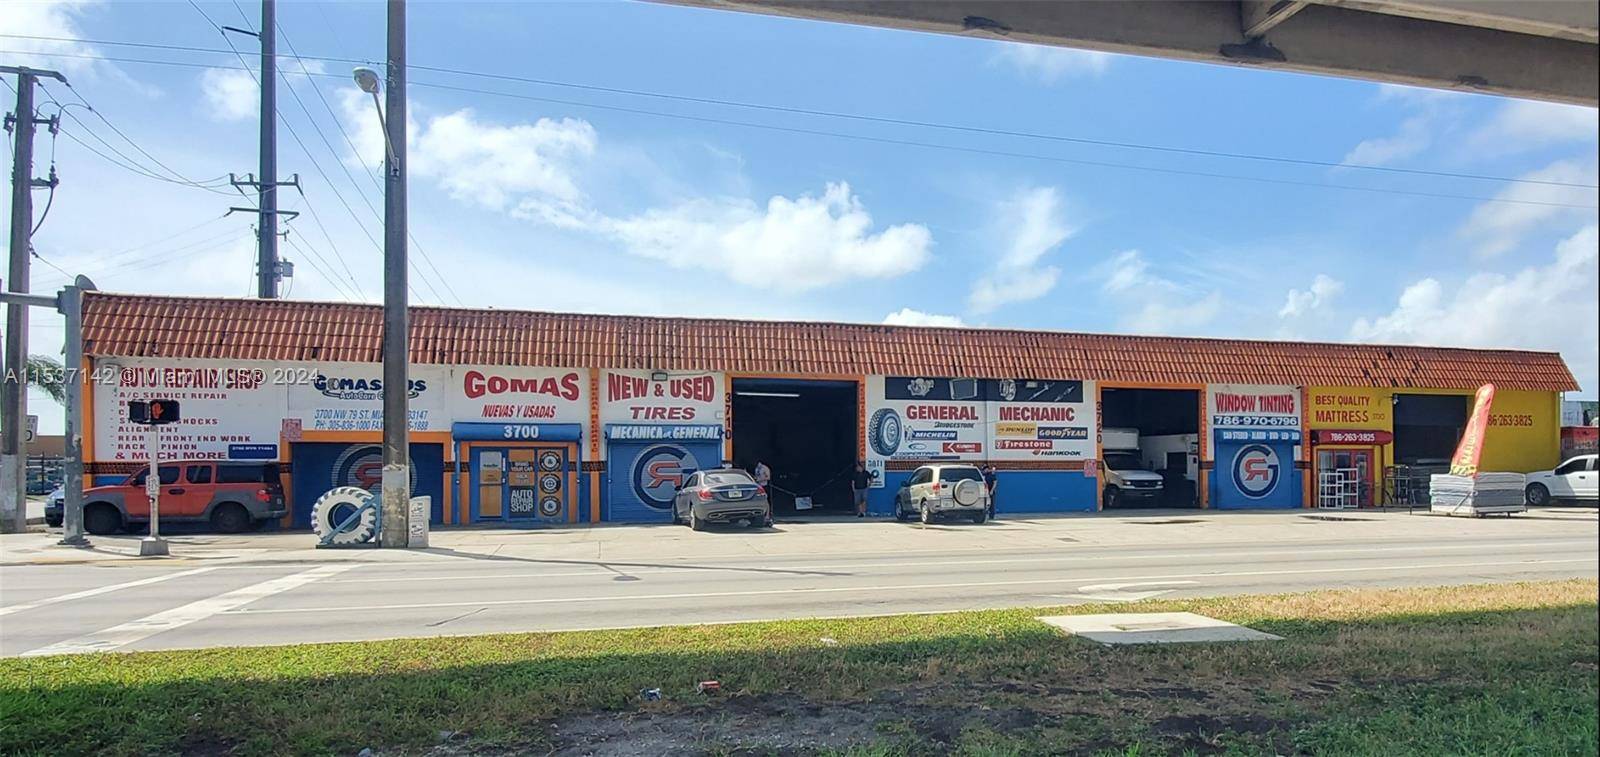 Fabulous Industrial Warehouse Located on Highly Visible NW 79th Street East 25th Street in Hialeah, steps from Amtrak, Metro Rail, and People Mover.